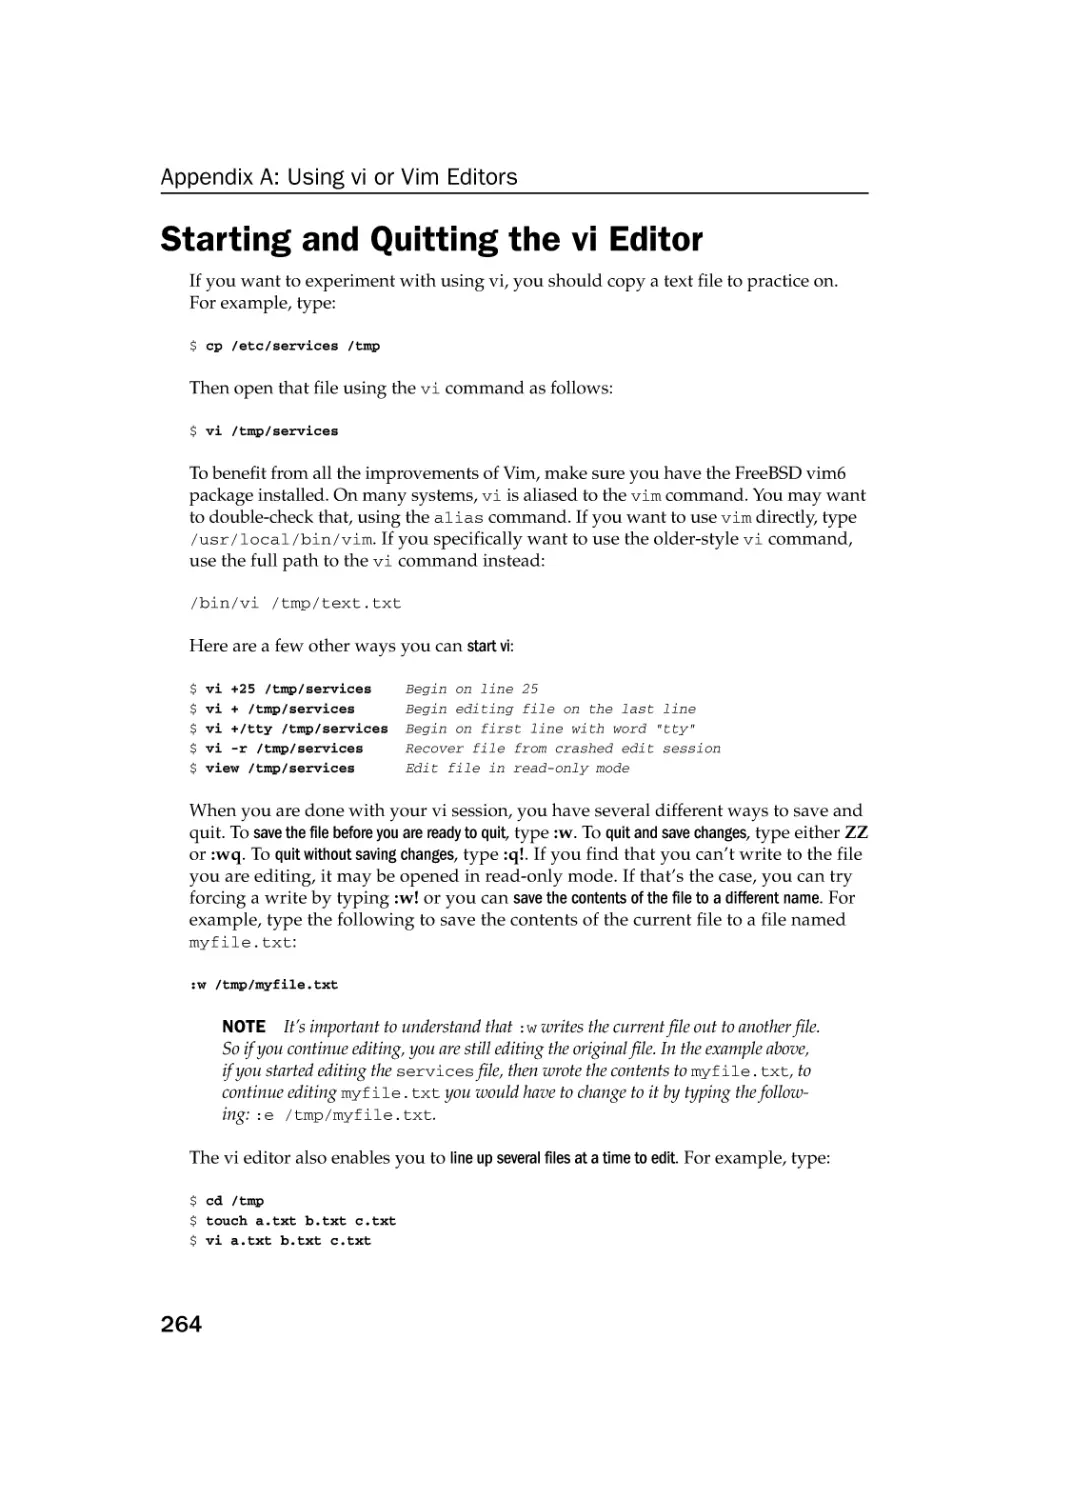 Starting and Quitting the vi Editor